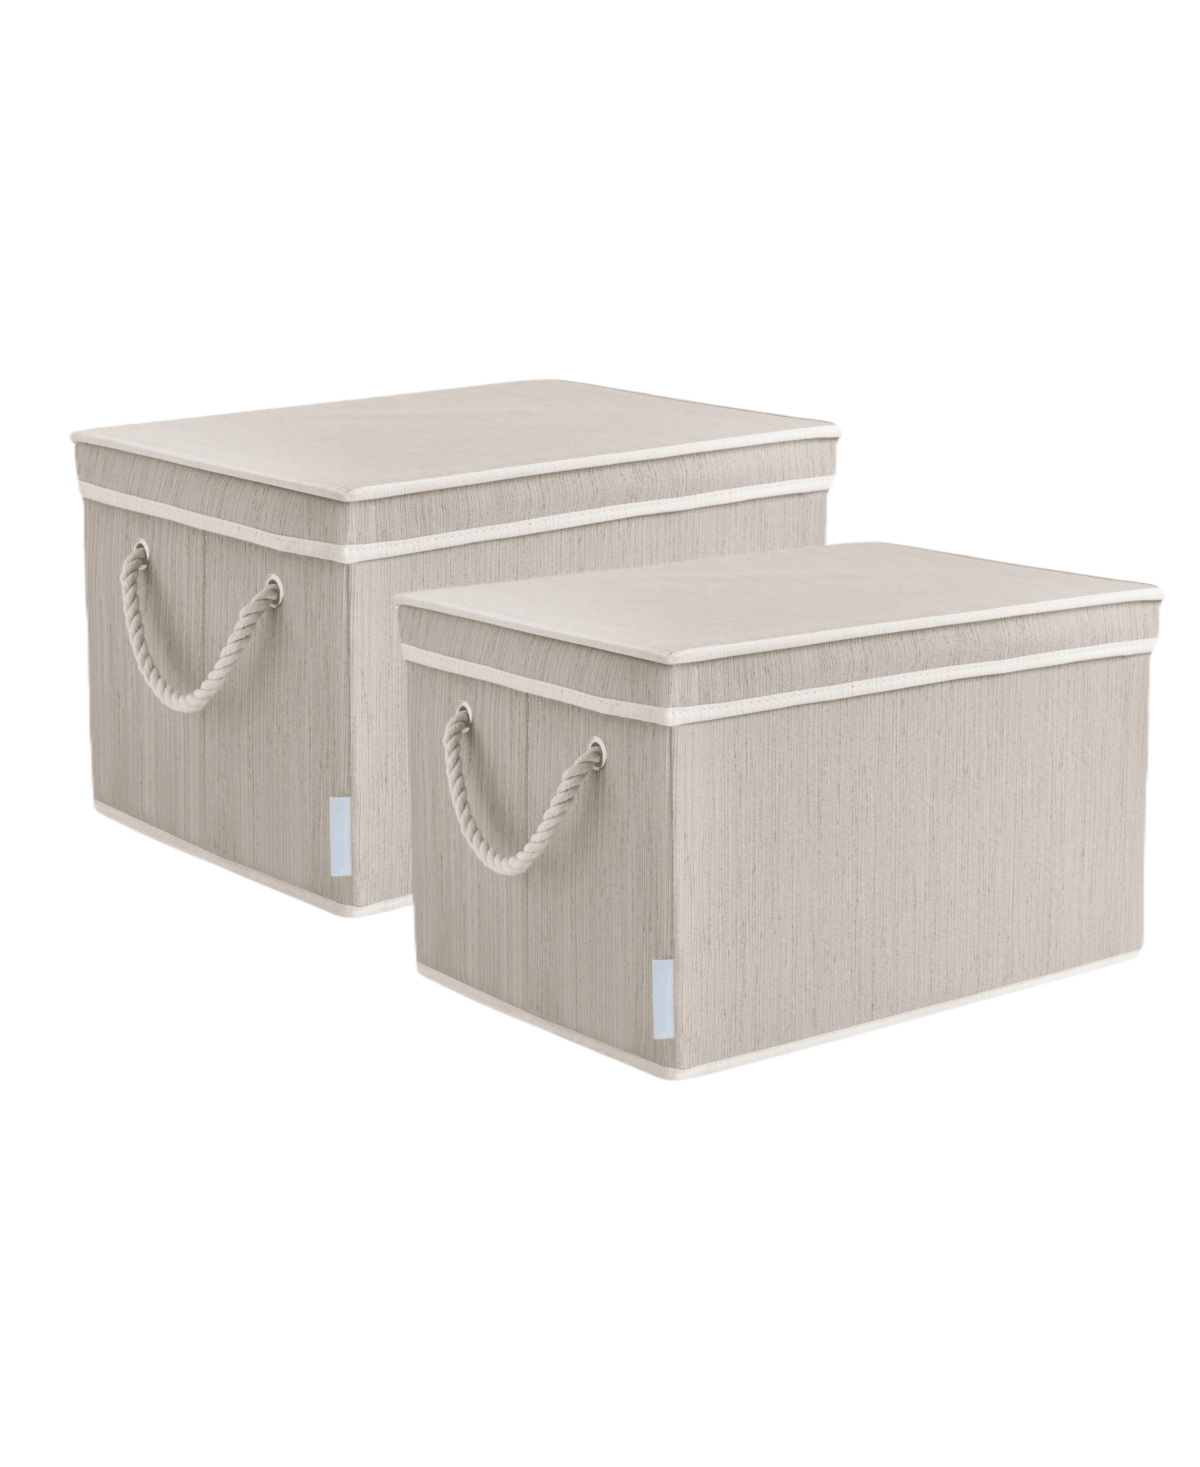 Wethinkstorage 34 Litre Collapsible Fabric Storage Bins With Lids And Cotton Rope Handles, Set Of 2 In Clay